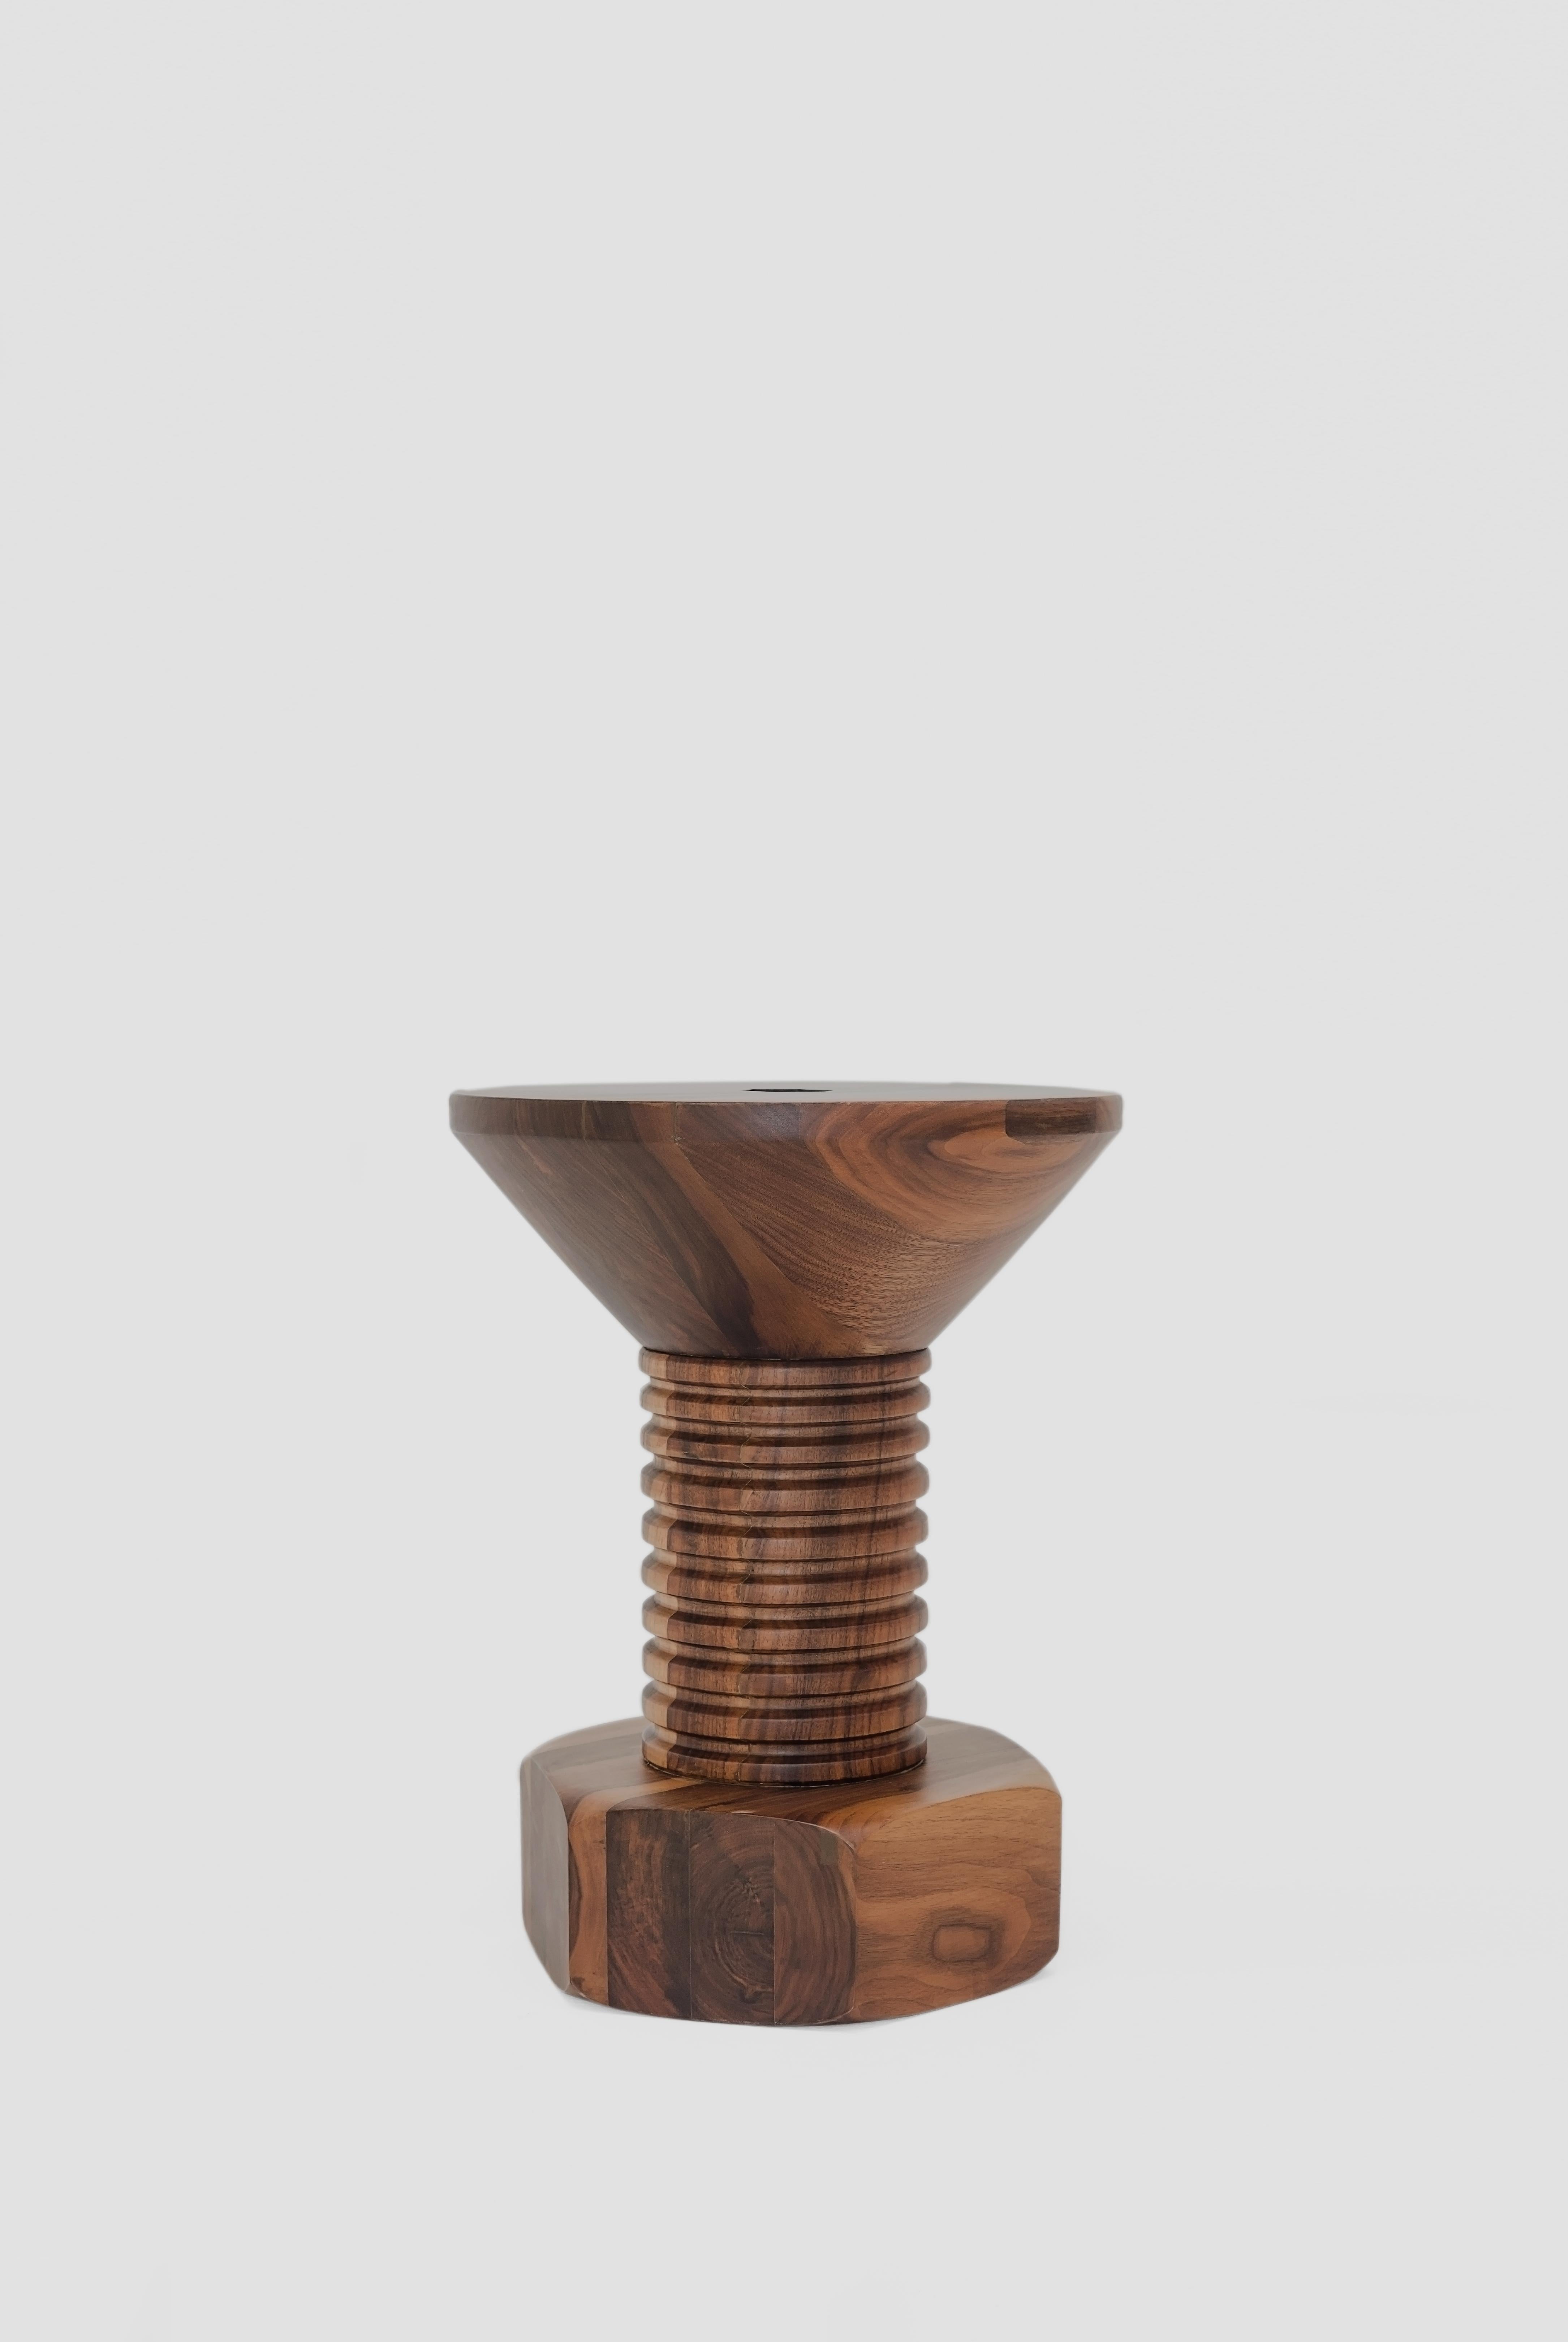 Allen is a walnut wood stool or side table designed by Arturo Verástegui for BREUER ESTUDIO. This piece is part of Diseño y Ebanistería, BREUER ESTUDIO first ever collection, in which they collaborated with top designers to achieve exceptional